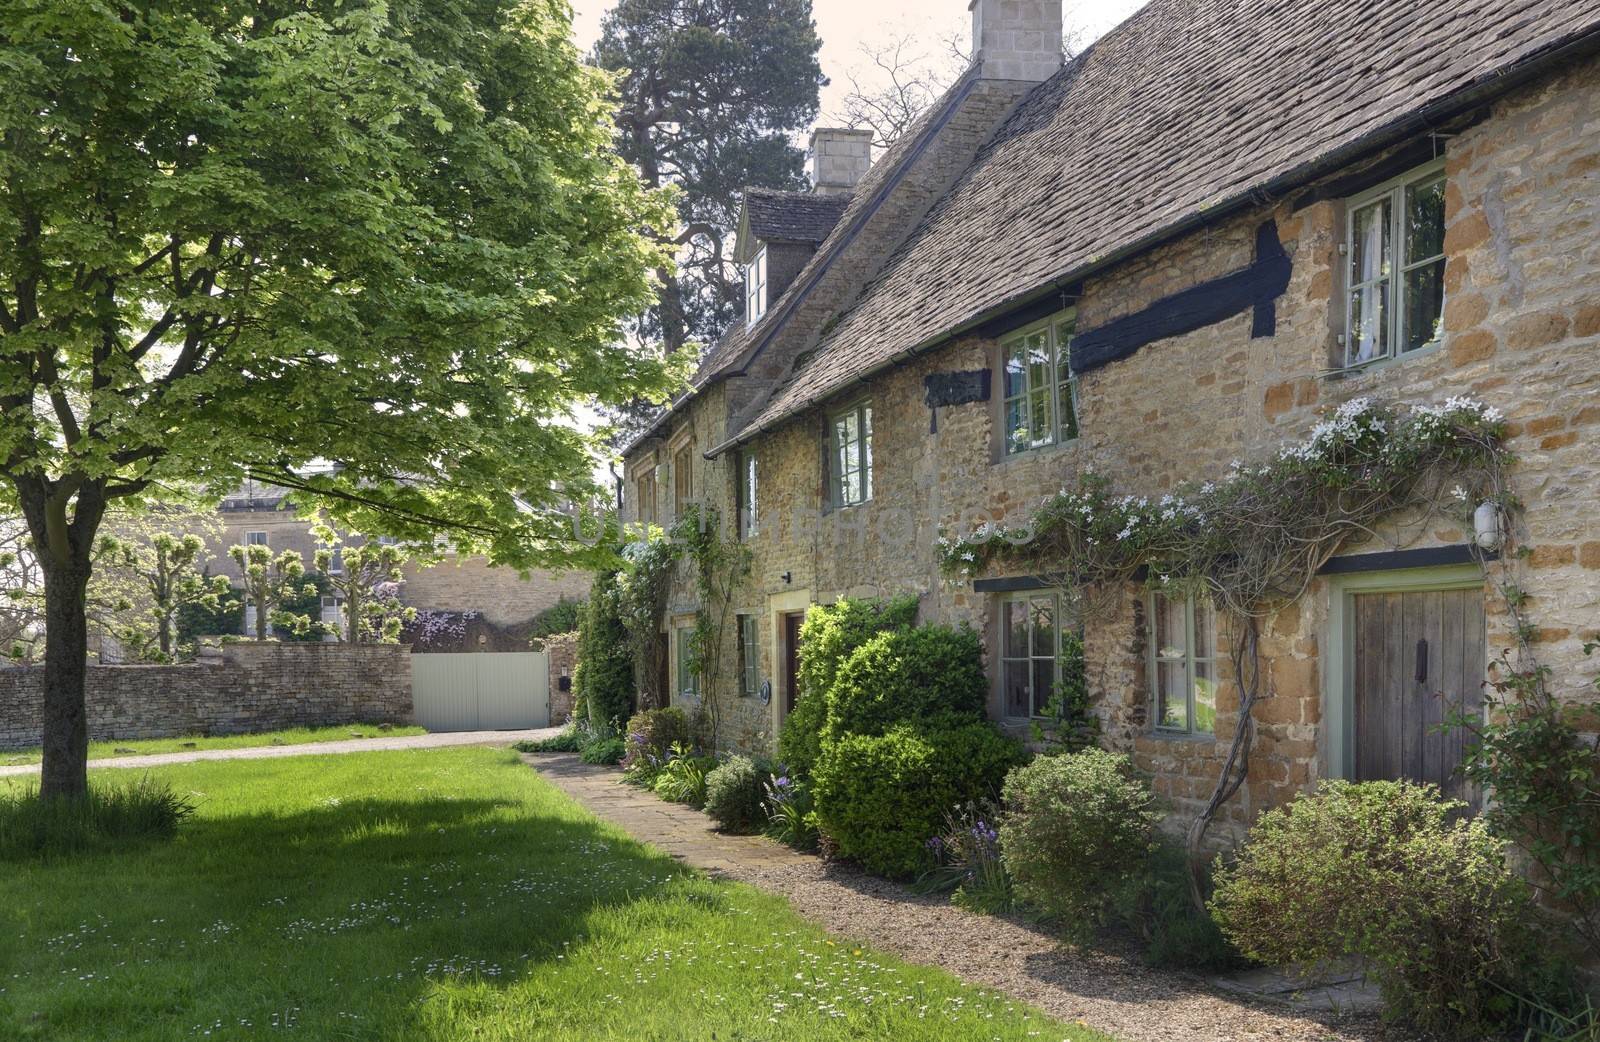 Row of Cotswold cottages, Lower Oddington, Gloucestershire, England.